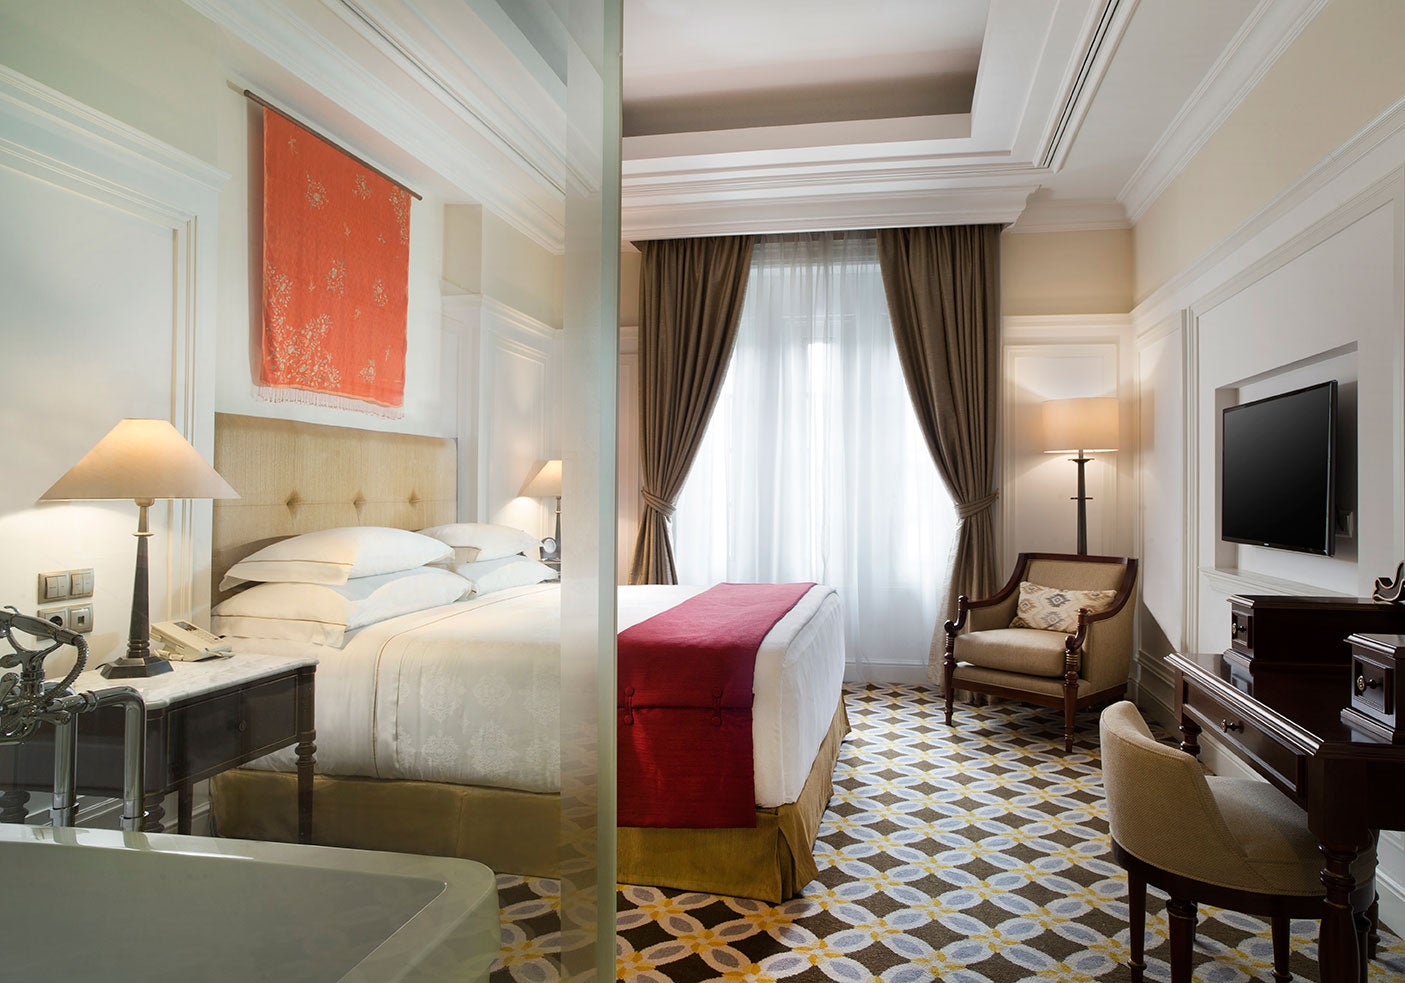 25 Luxurious Hotels with Rooms Under $200 a Night
